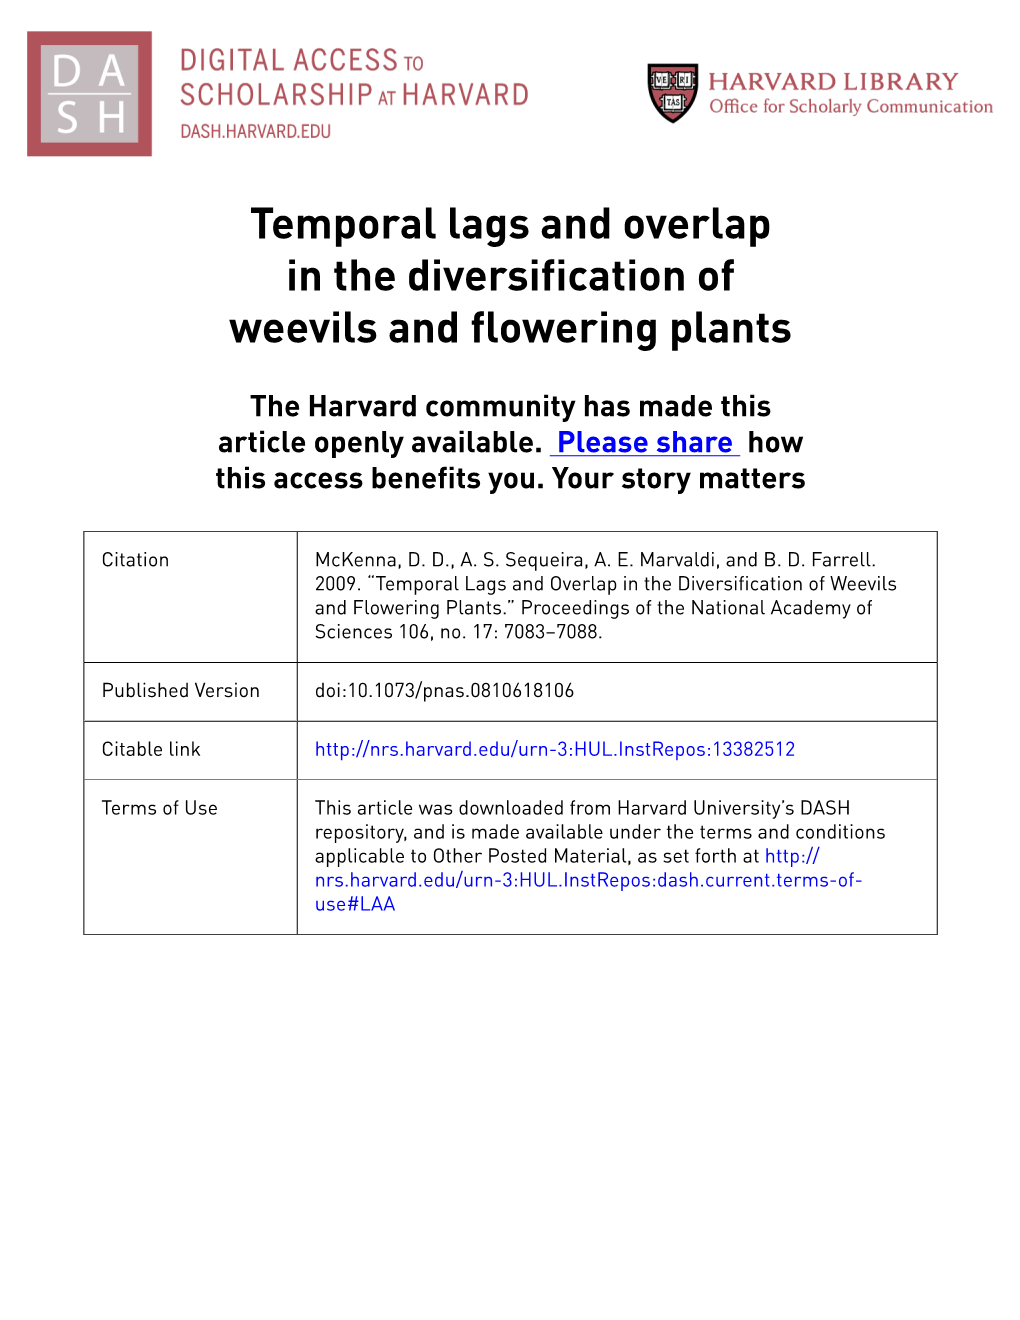 Temporal Lags and Overlap in the Diversification of Weevils and Flowering Plants